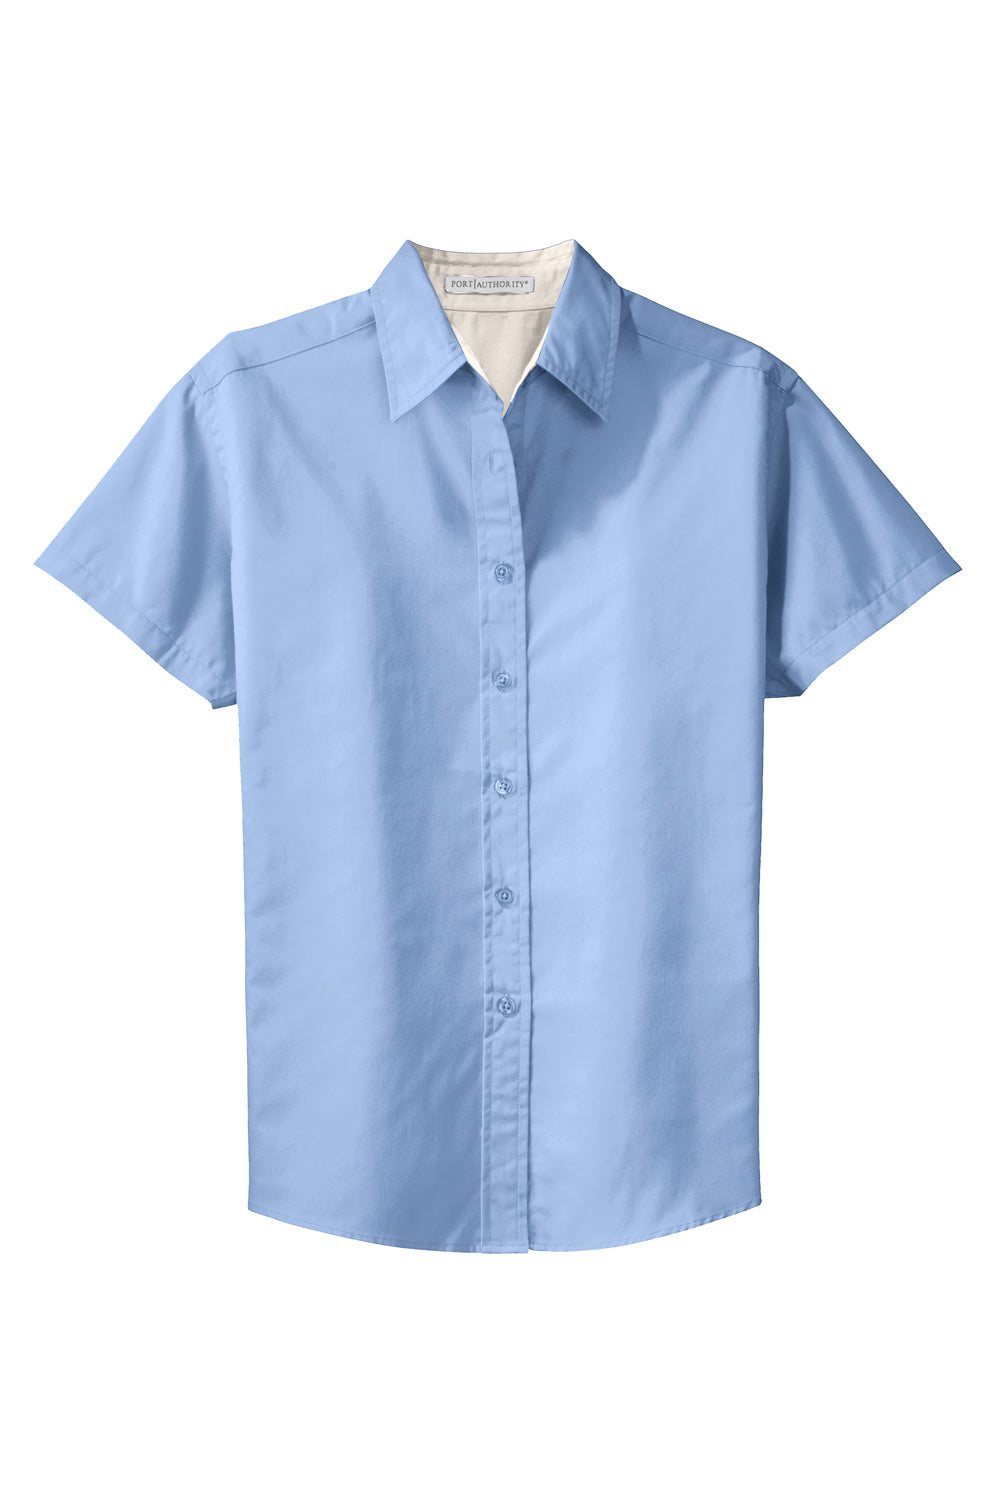 Port Authority L508 Womens Easy Care Wrinkle Resistant Short Sleeve Button Down Shirt Light Blue Flat Front